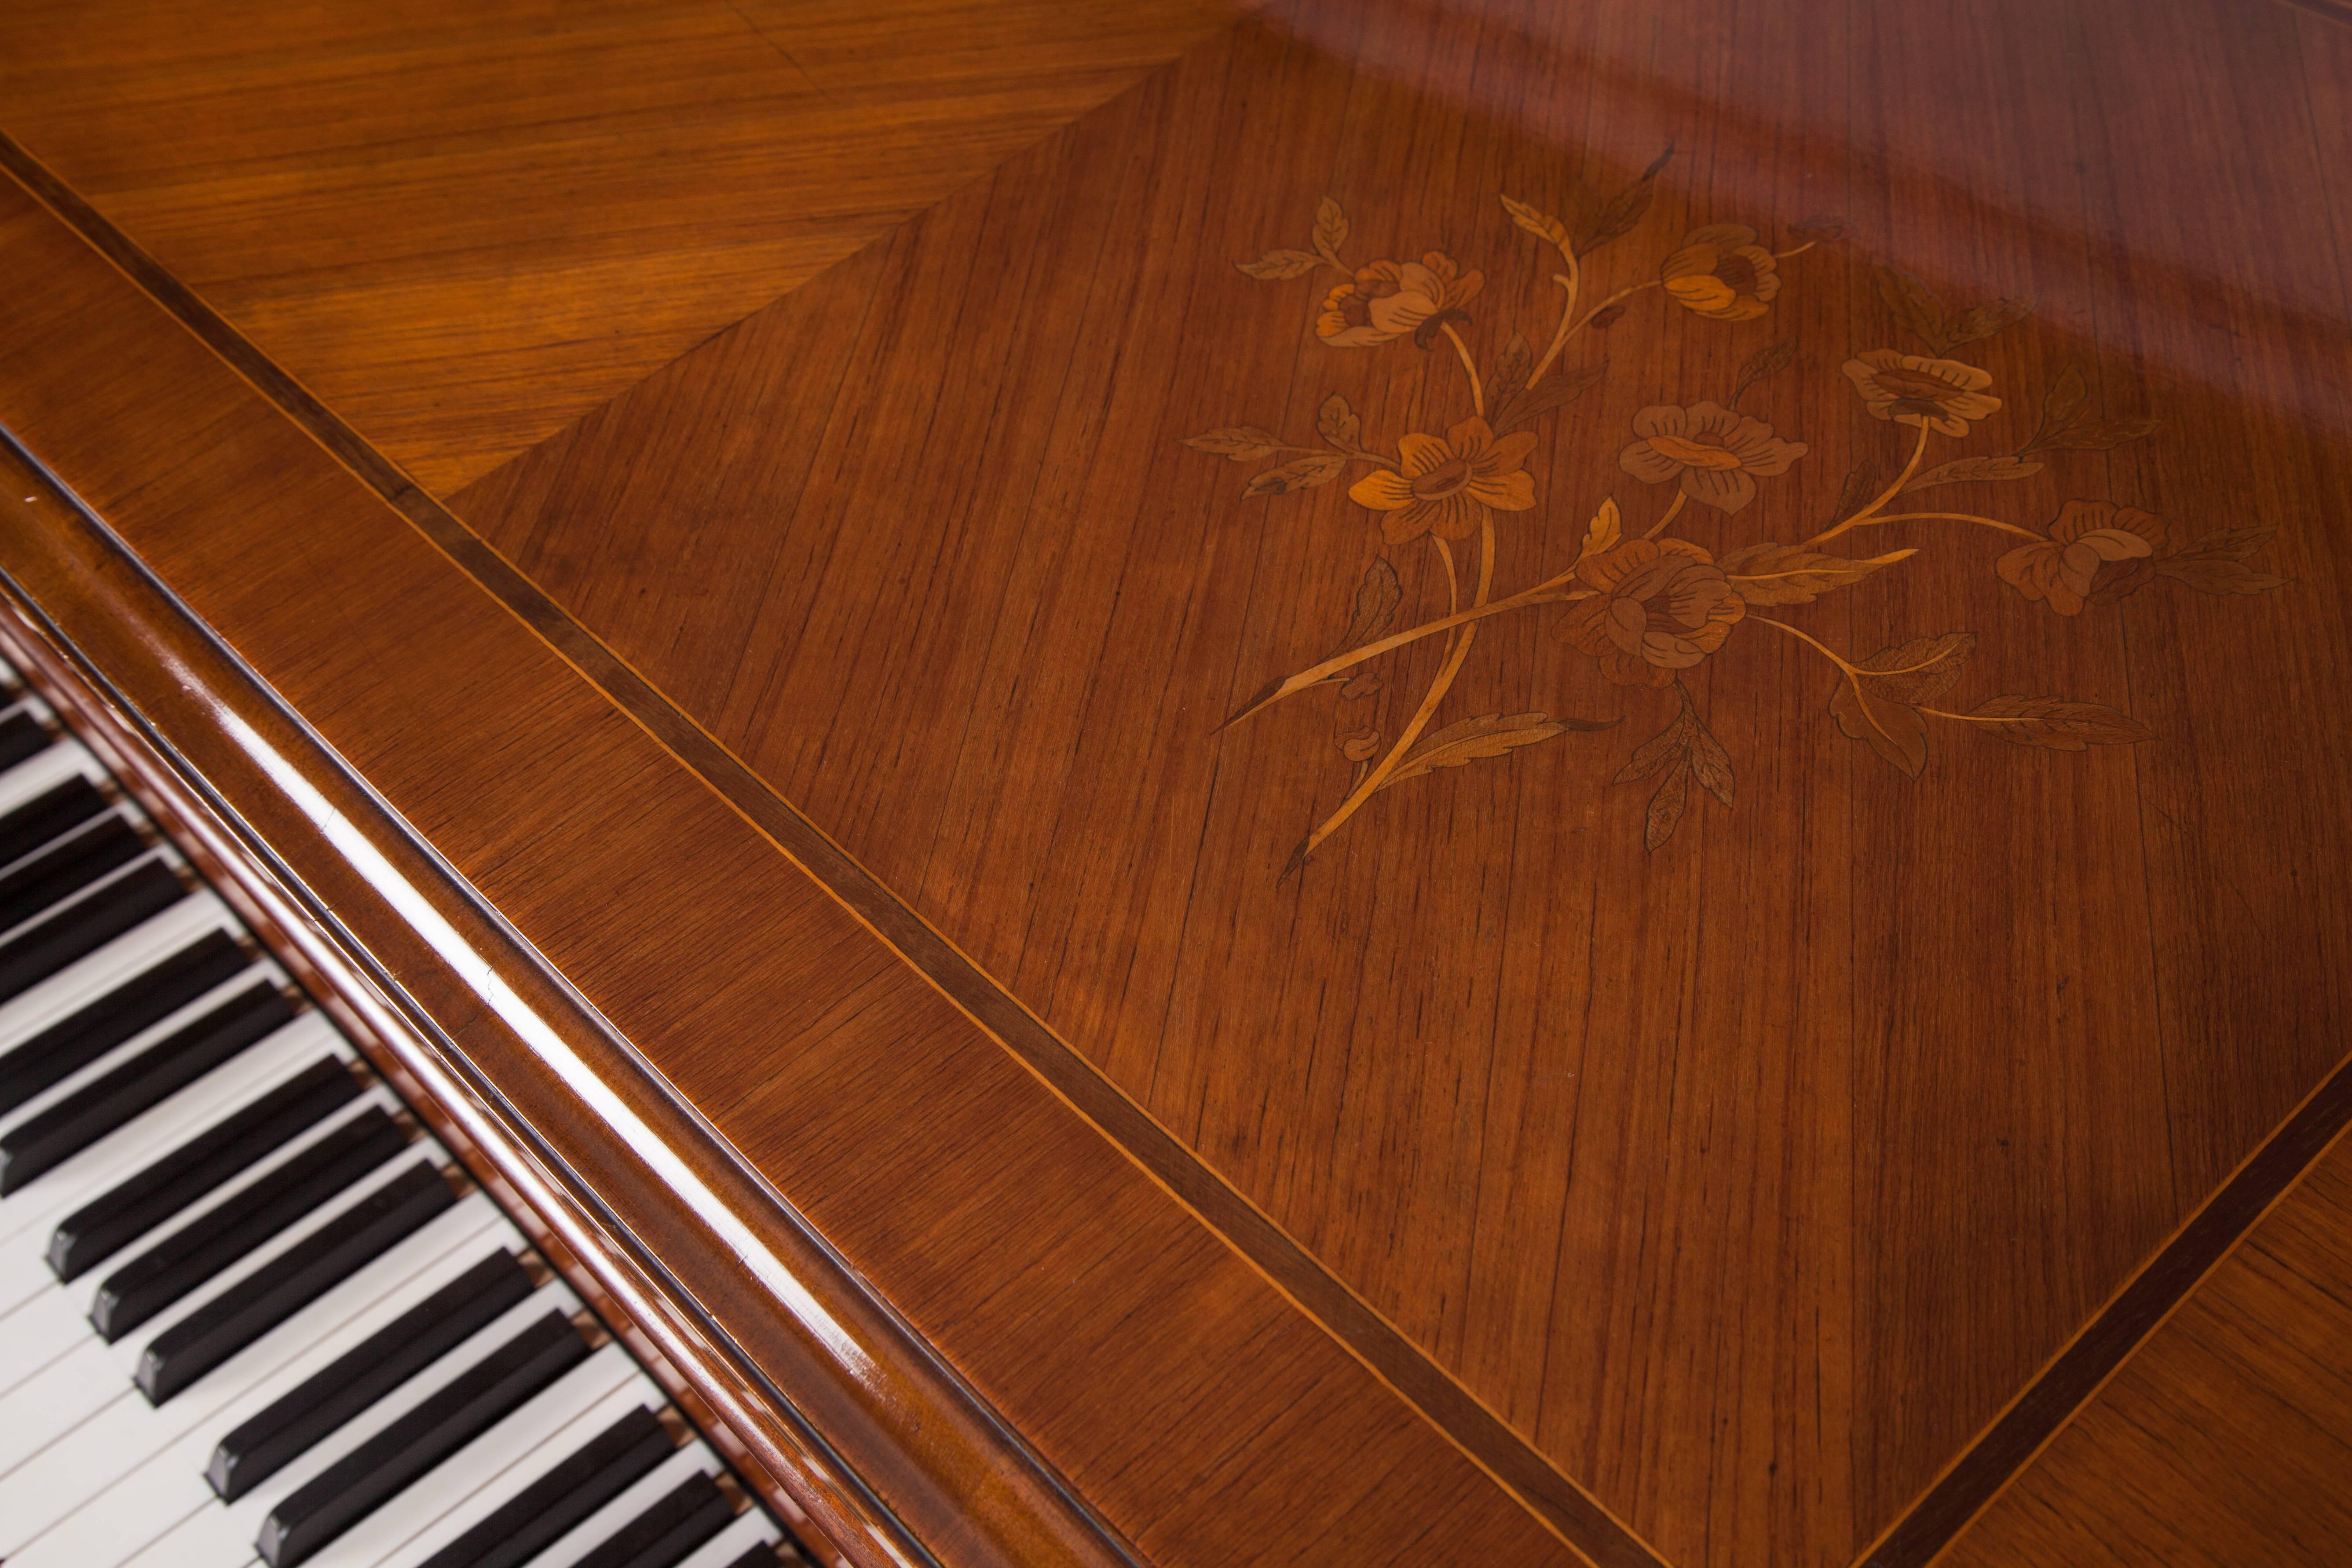 Modele F - "Gronkowski" from Pleyel in Paris, exceptional piano coming on six fluted legs with a hand polished shellack finish and maple, walnut, mahogany, rosewood, amaranth and boxwood inlays on a cherry basis.

The grand piano has